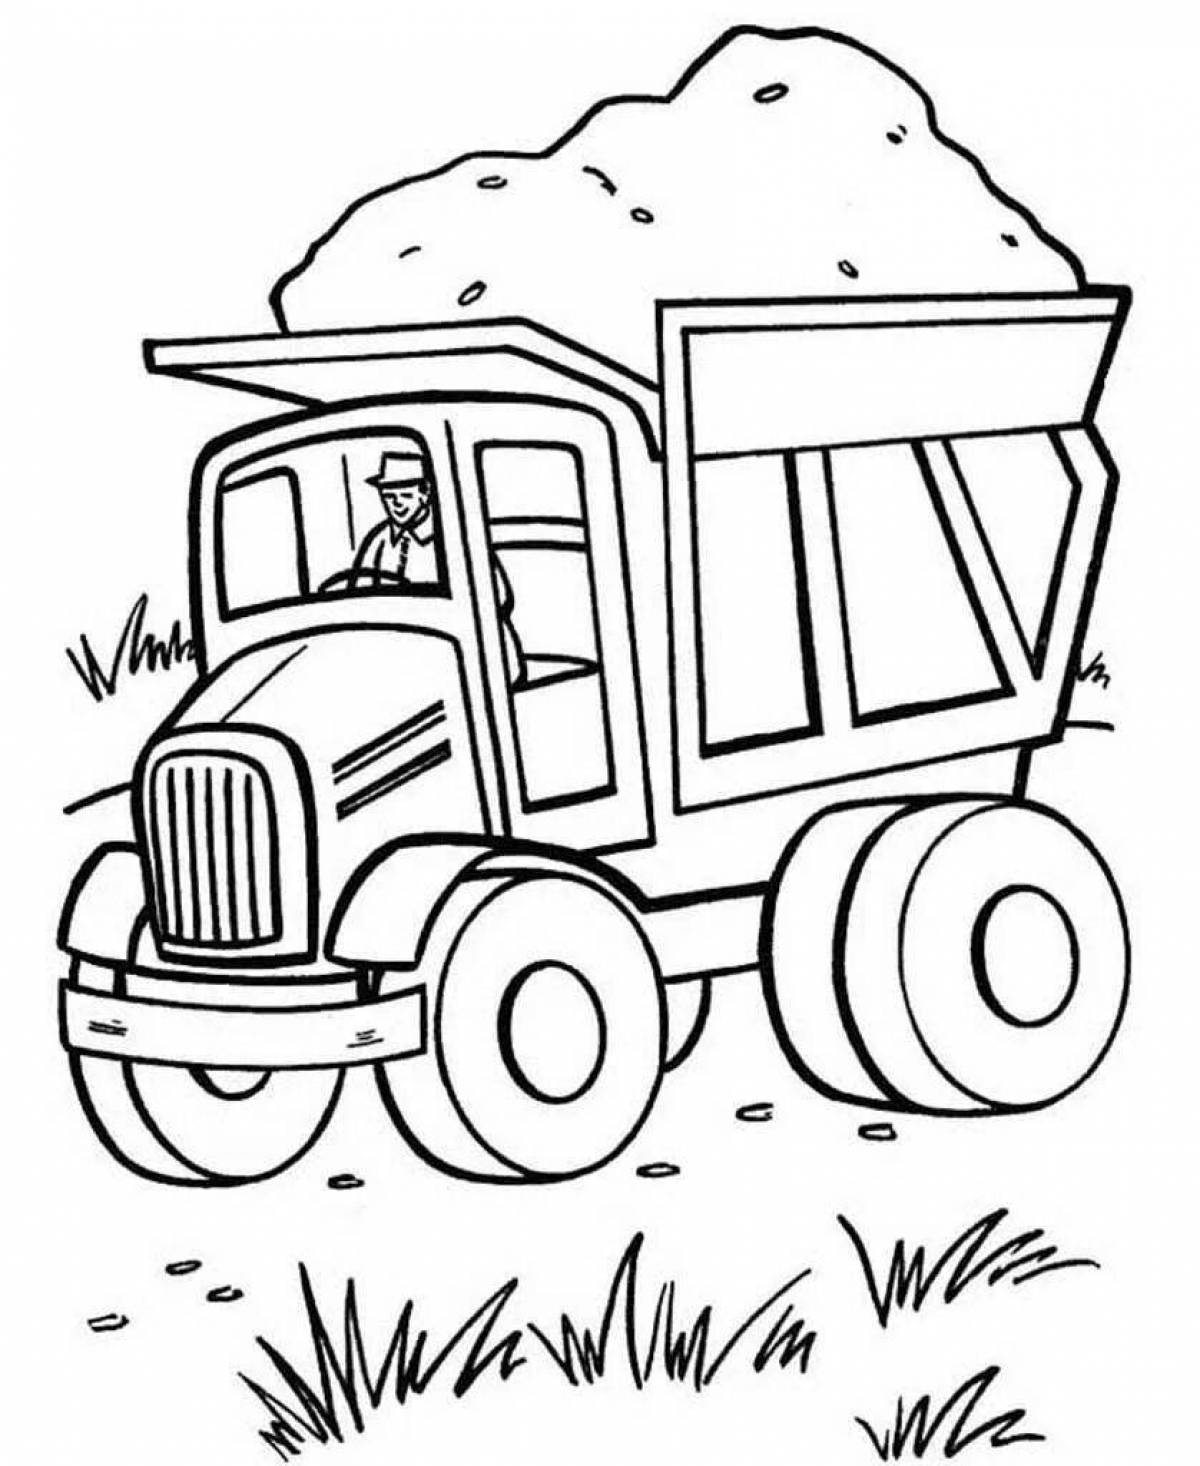 Colorful truck coloring book for 4-5 year olds